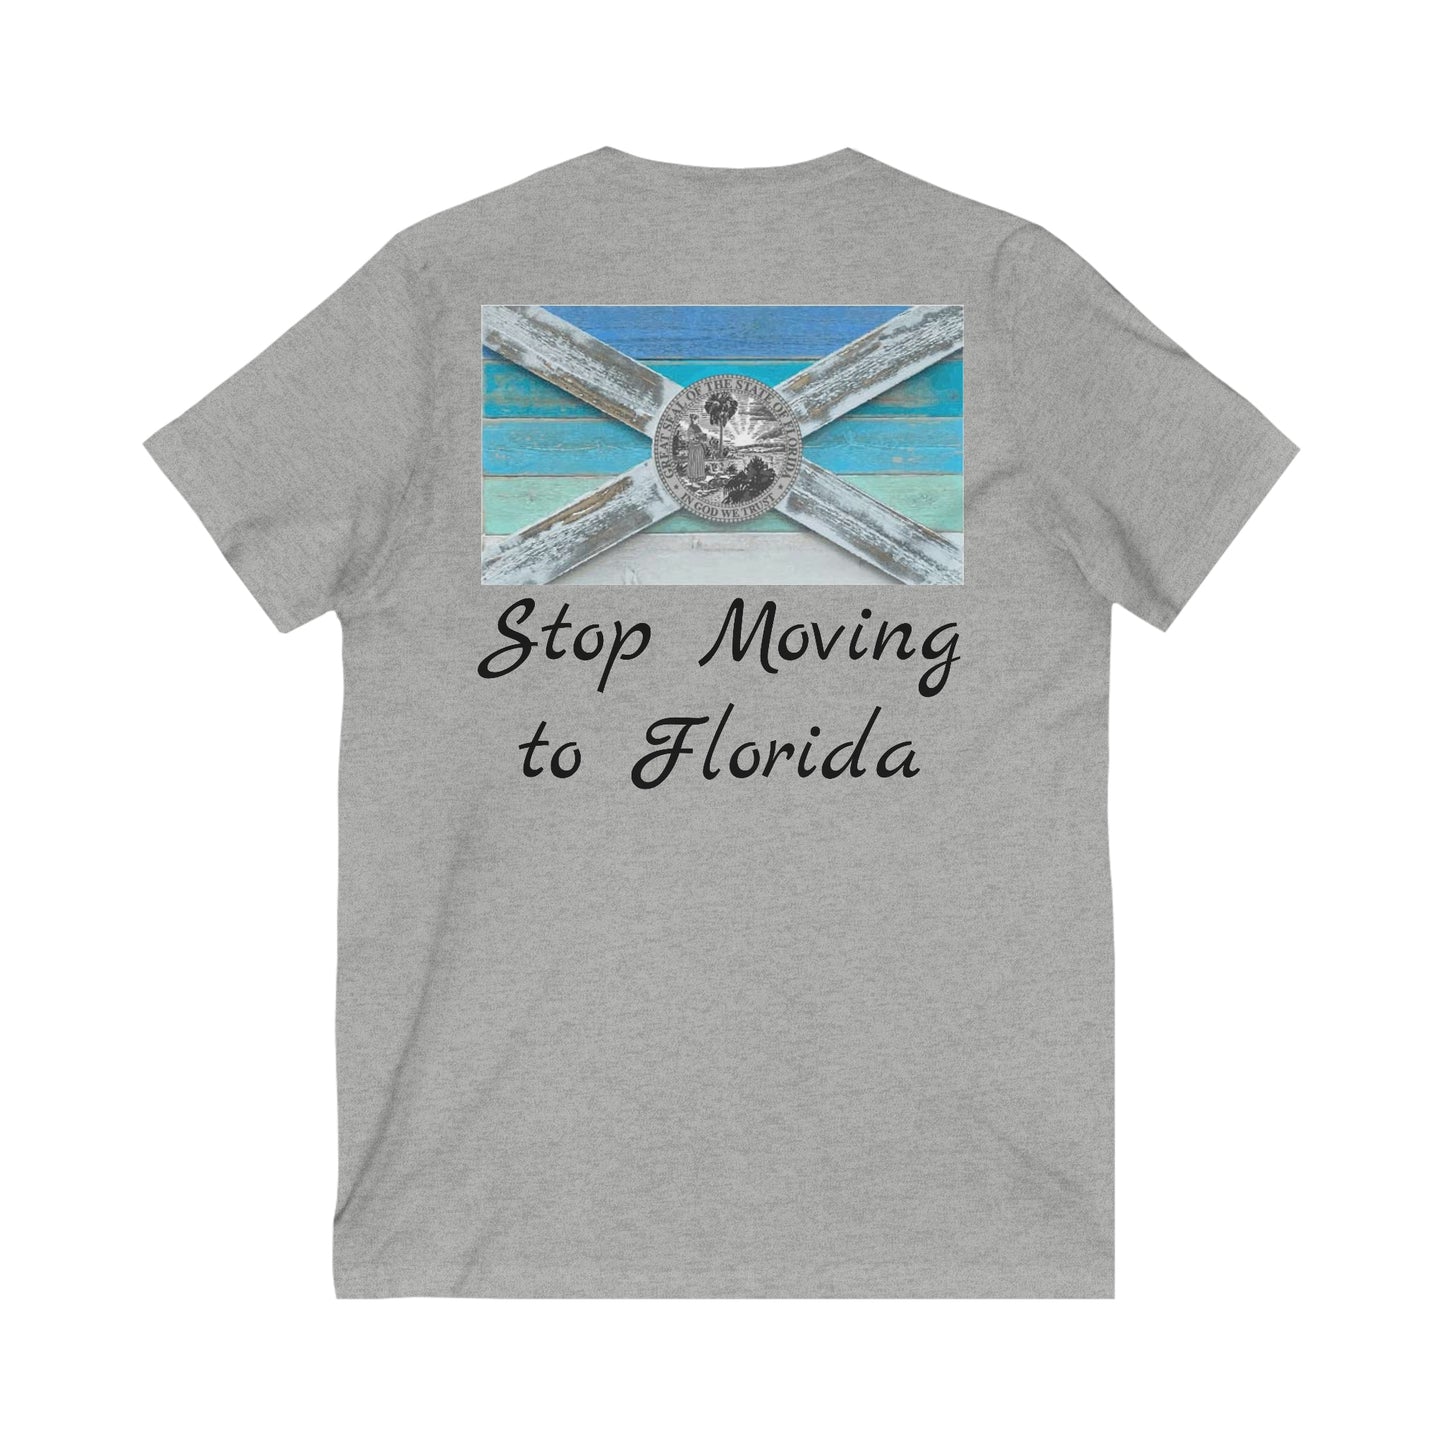 Stop Moving to Florida Women's V-Neck Tee